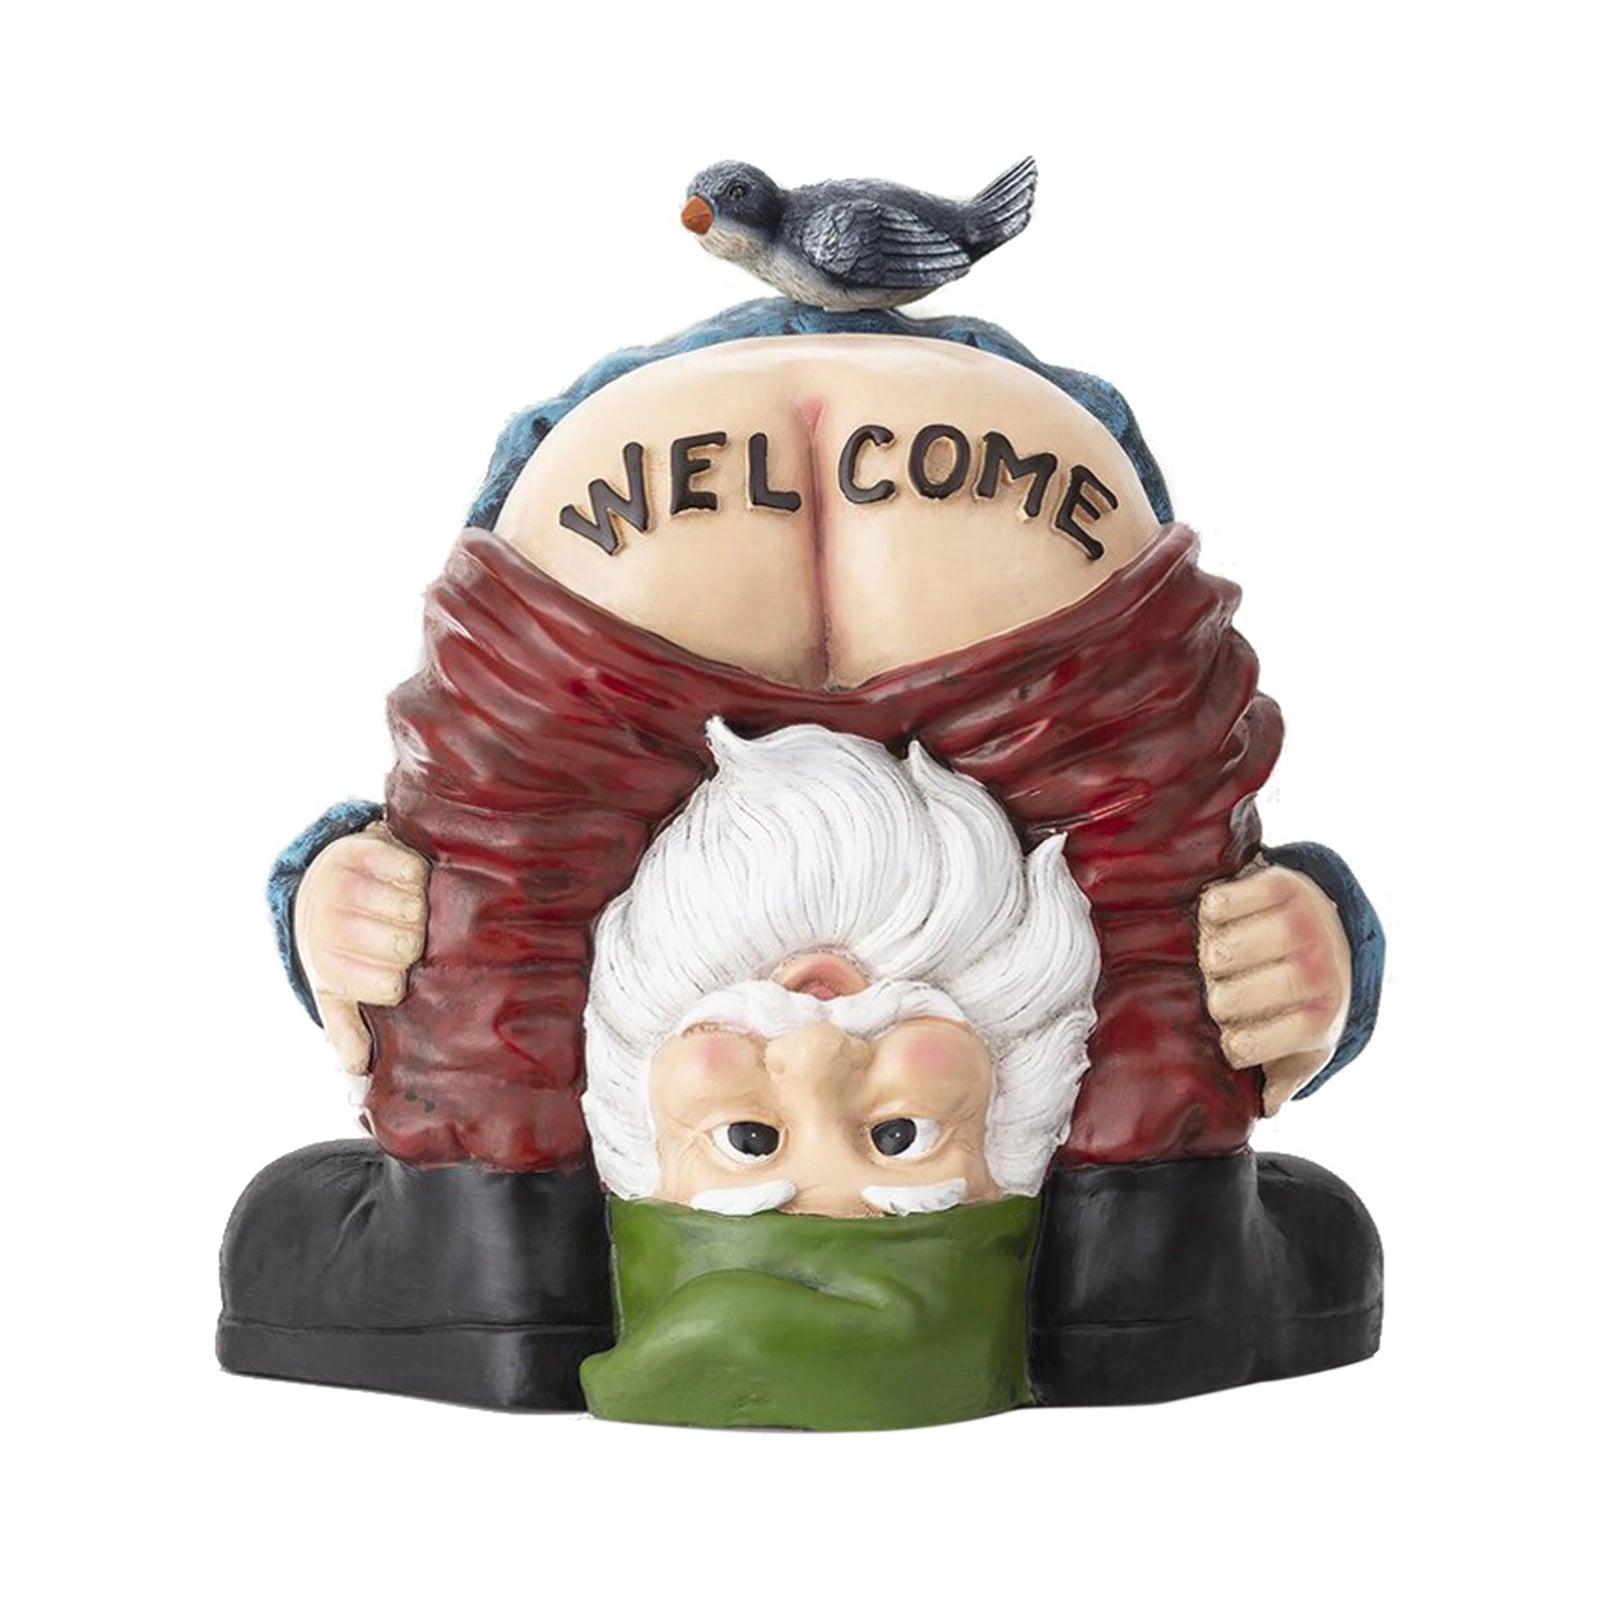 Rose / China Fuuny Welcome Gnome With Bird Statue Decorative Funny Waterproof Resin Garden Gnome Statue For Outdoor Indoor Lawn Patio Yard